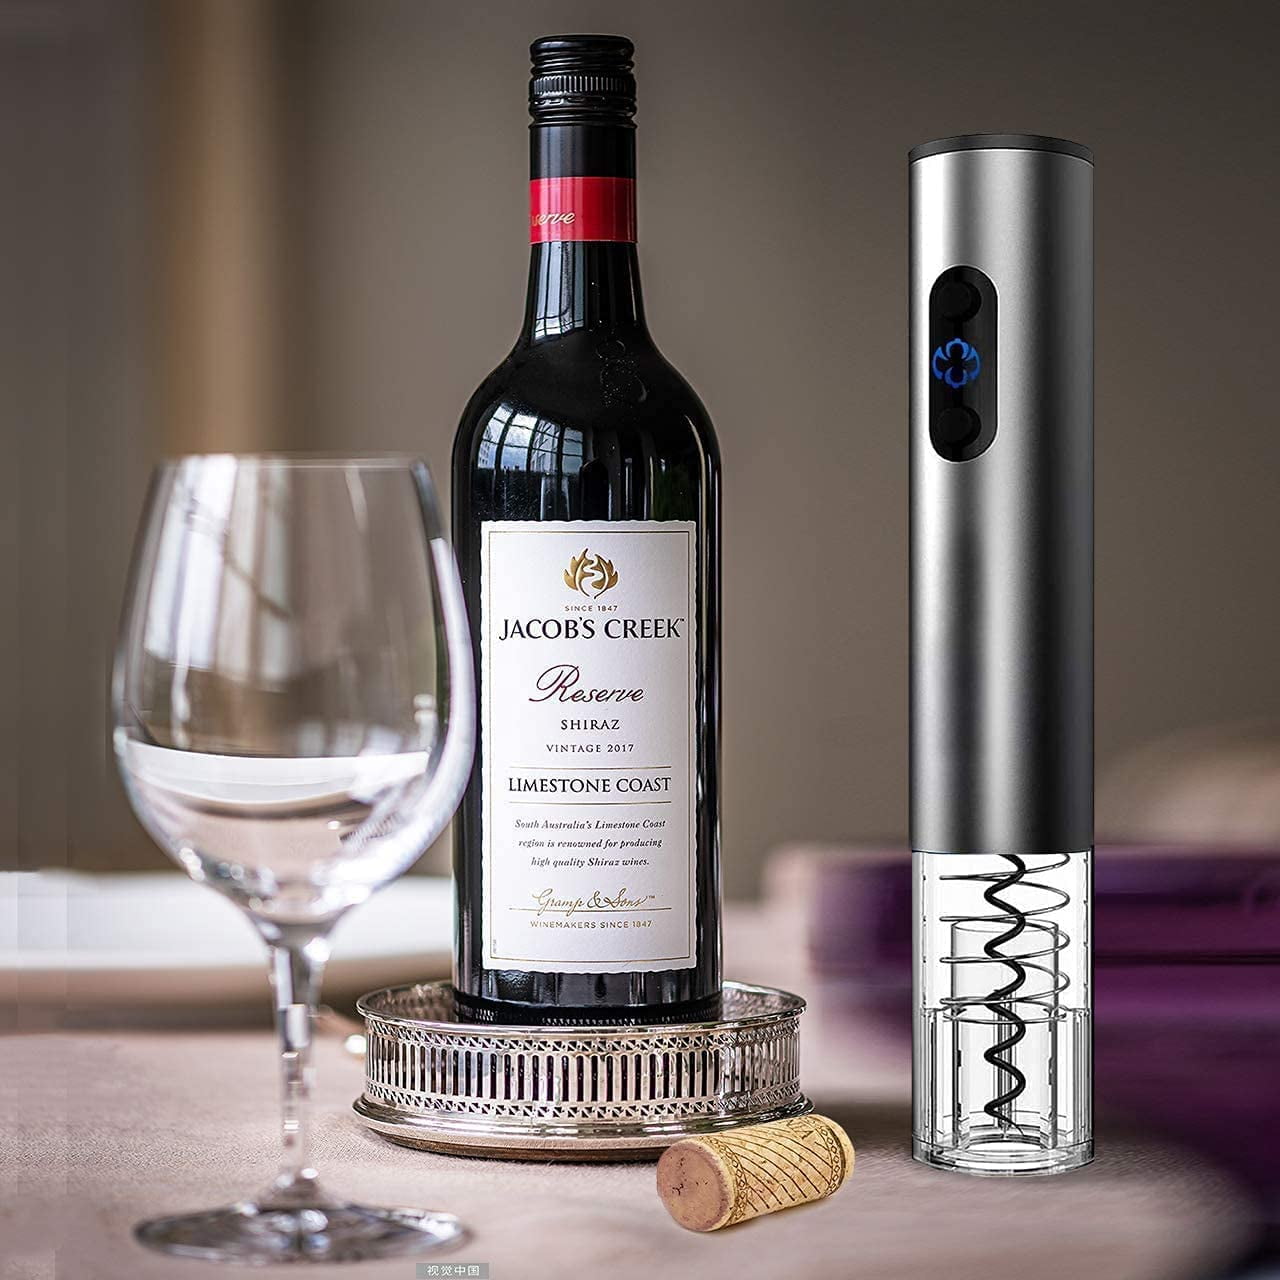 Gra De Vino Stainless Steel Electric Wine Bottle Opener Gift Set –  Rechargeable, Automatic Corkscrew, Charger, Stand, Foil Cutter, Wine Pourer  and Stopper Included –